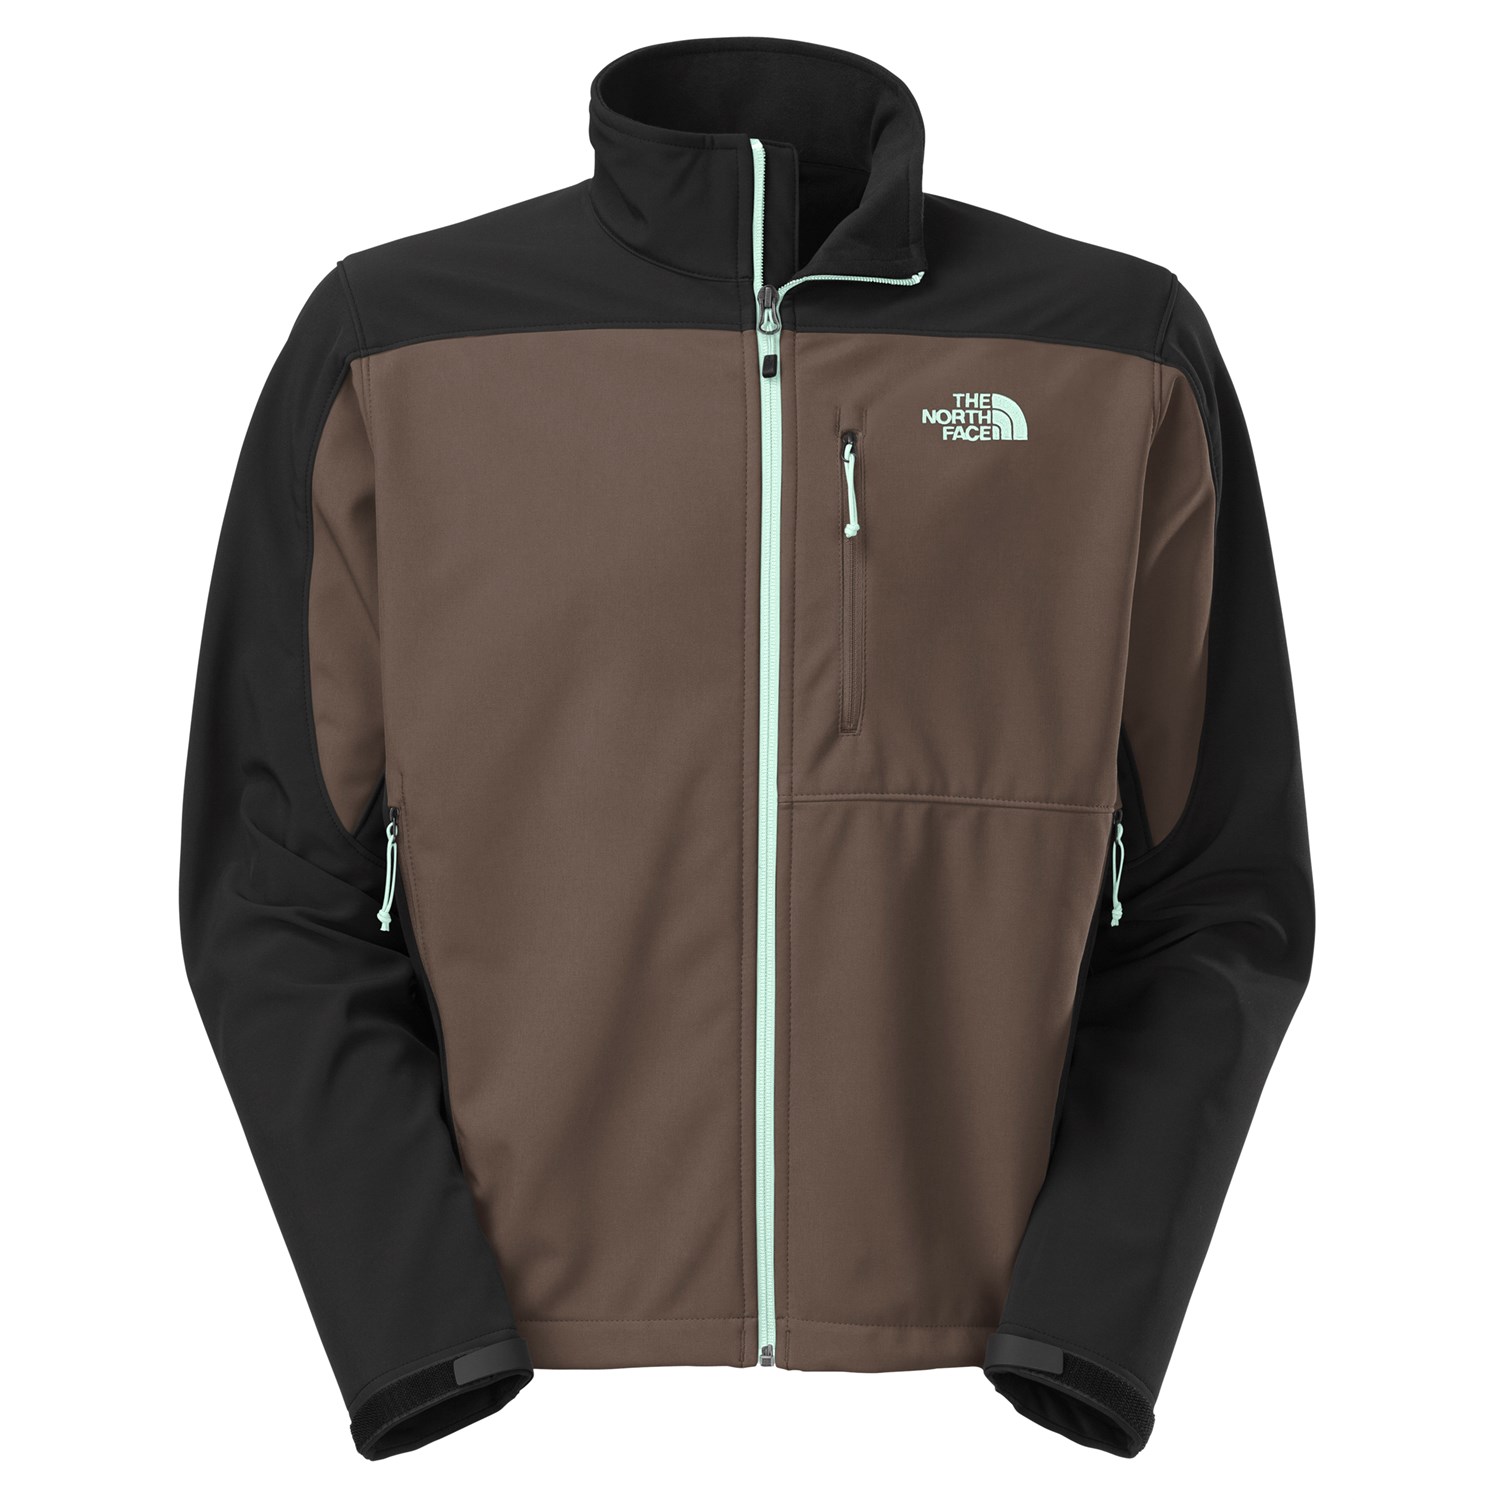 The North Face Apex Bionic Jacket | evo